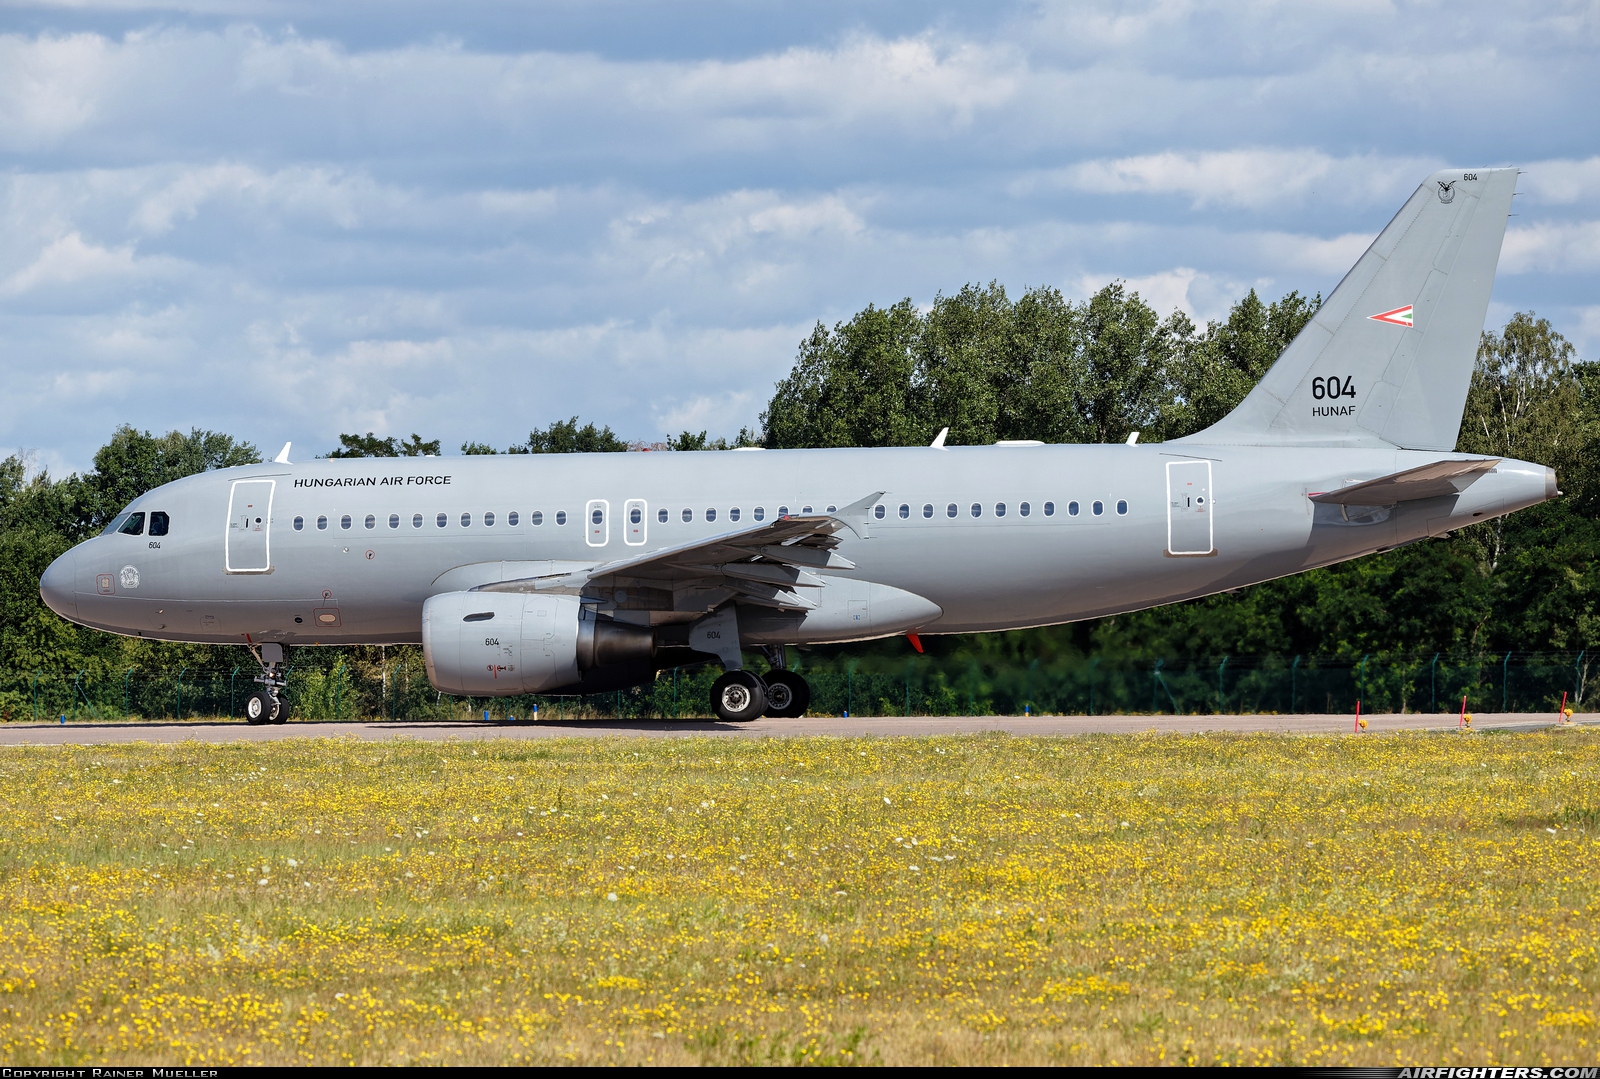 Hungary - Air Force Airbus A319-112 604 at Wunstorf (ETNW), Germany